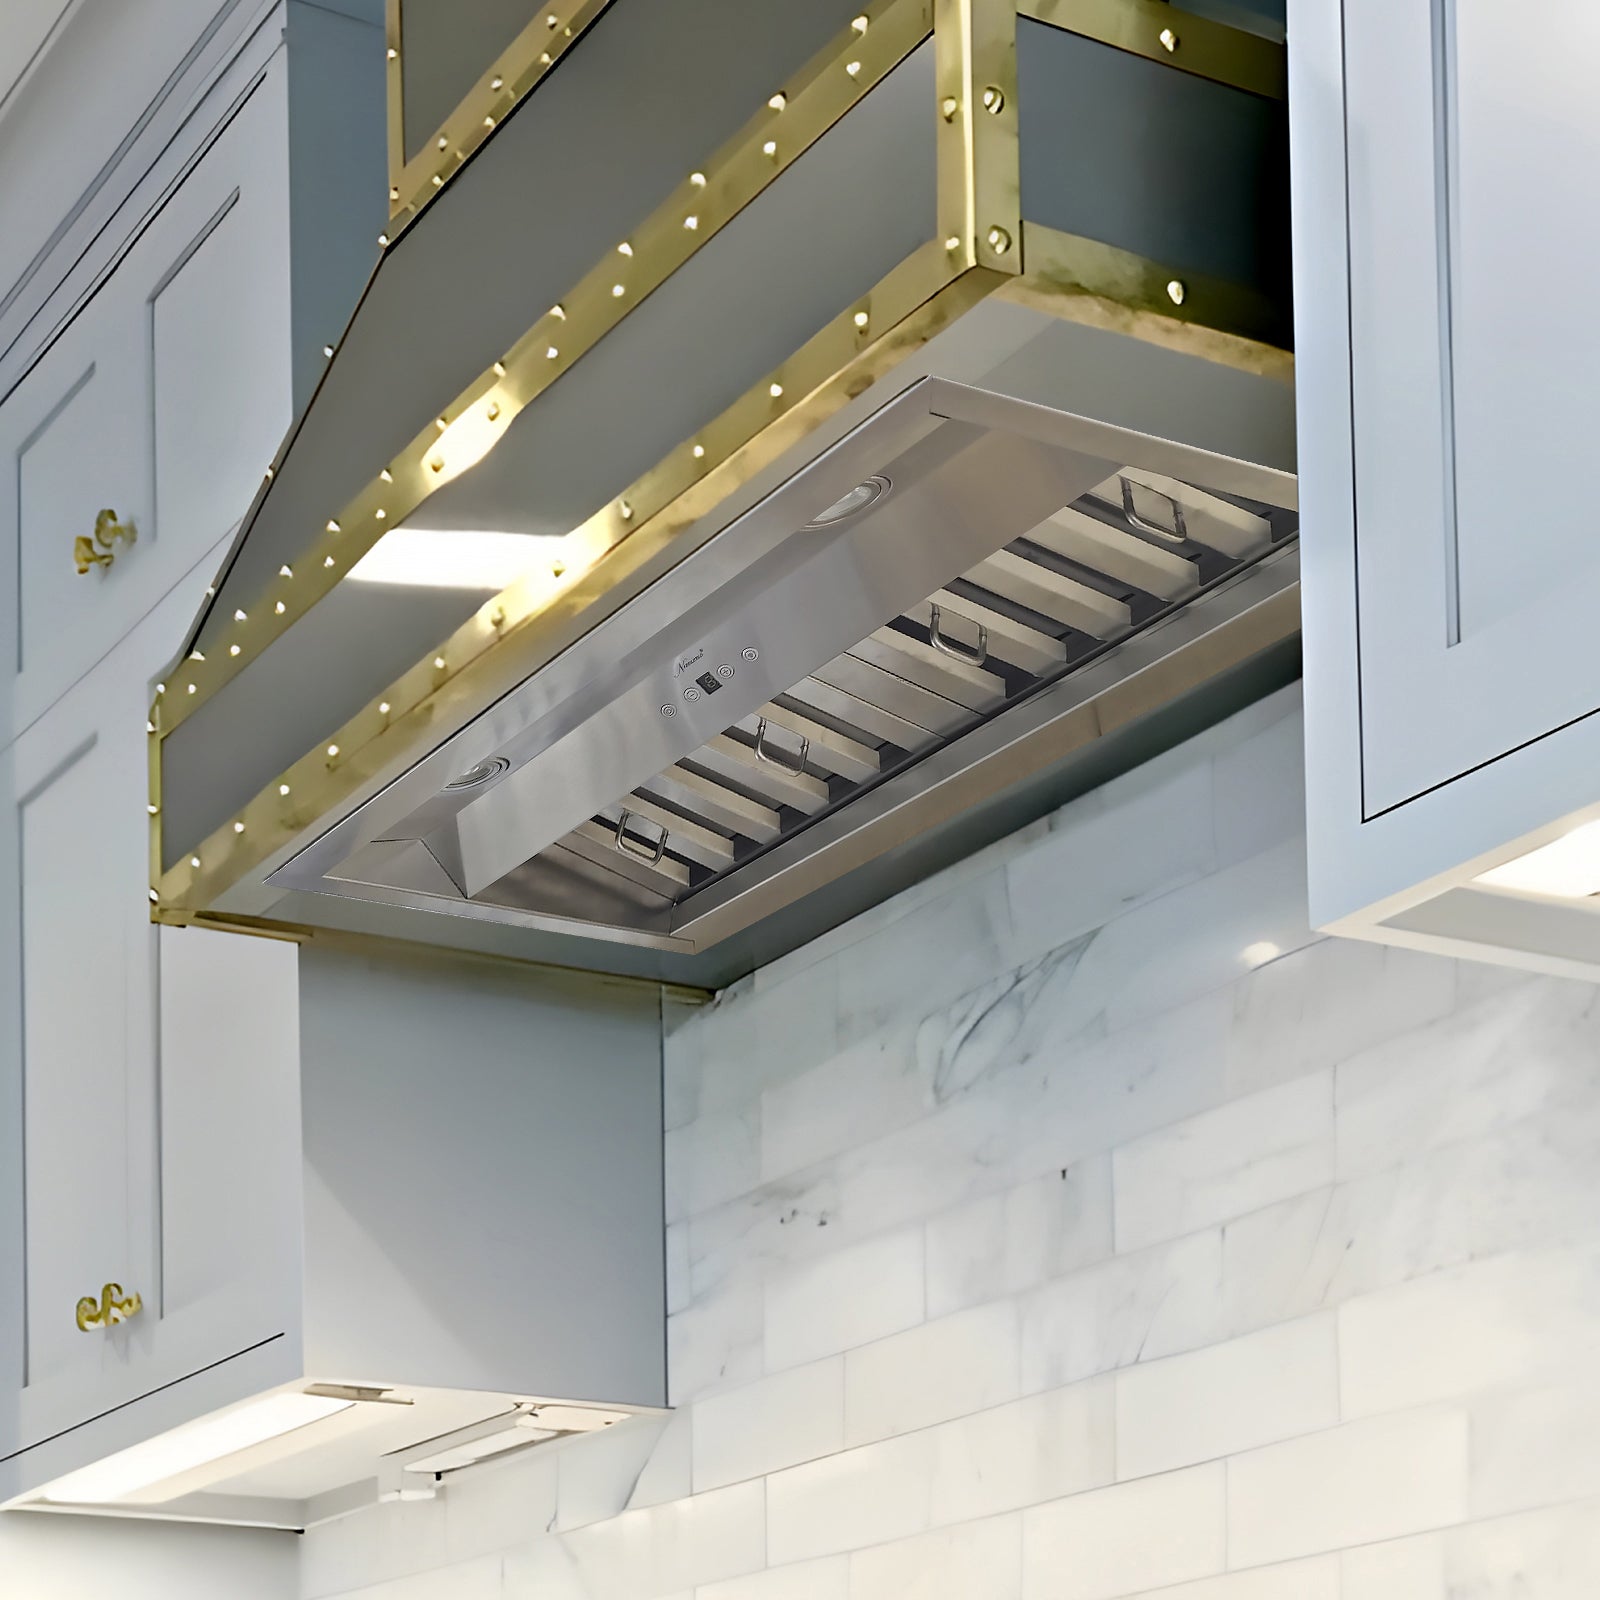 Range Hood Insert 30 Inch, Ultra Quiet, Powerful Suction Built-in Kitchen  Vent Hood, Stainless Steel Ducted Stove Hood with Dimmable LED Lights Warm  